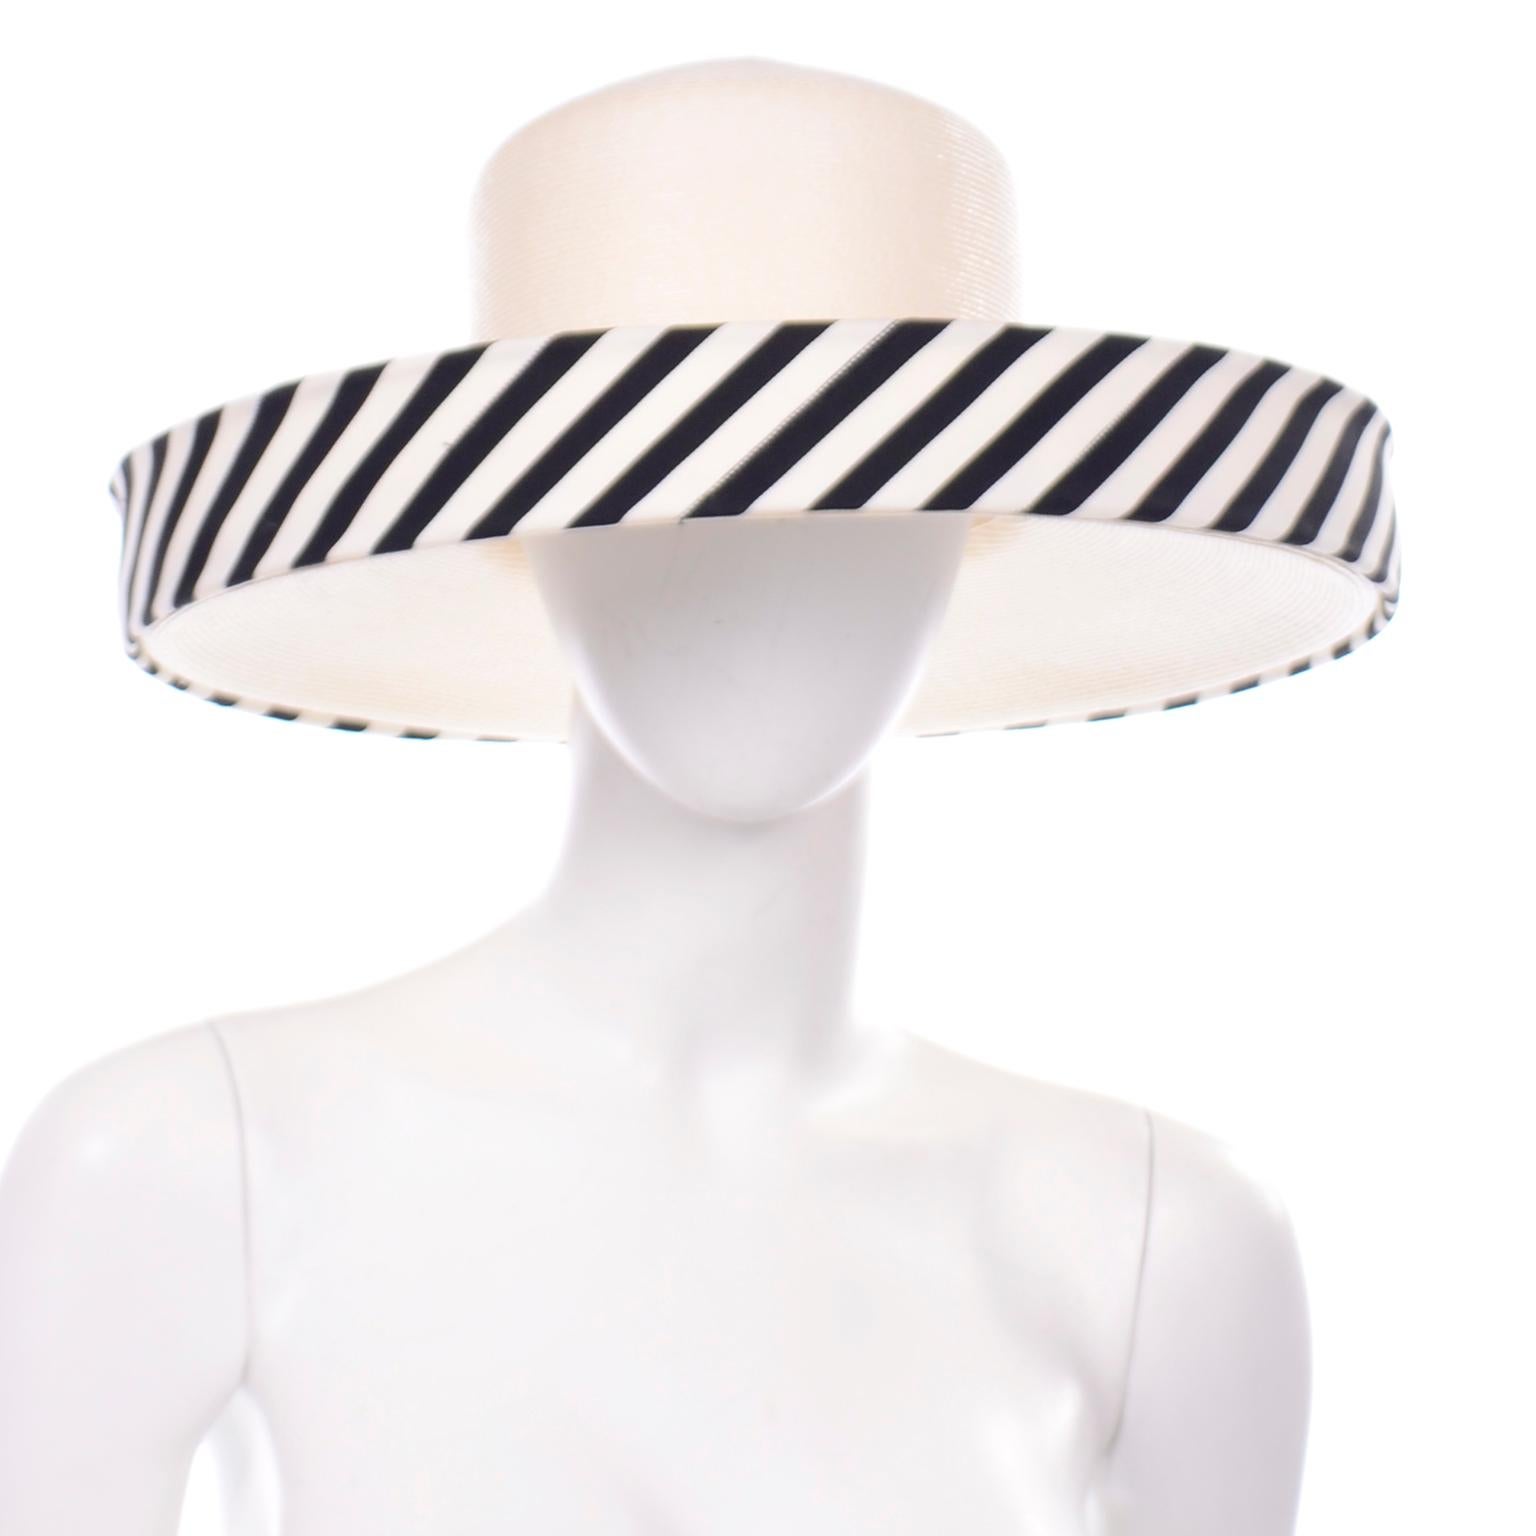 This sensational vintage ivory woven summer hat has an upturned brim that is lined with black and white stripes. There is a small knotted bow on the side and the hat has the Frank Olive for Saks Fifth Avenue label.
This incredible Frank Olive hat os